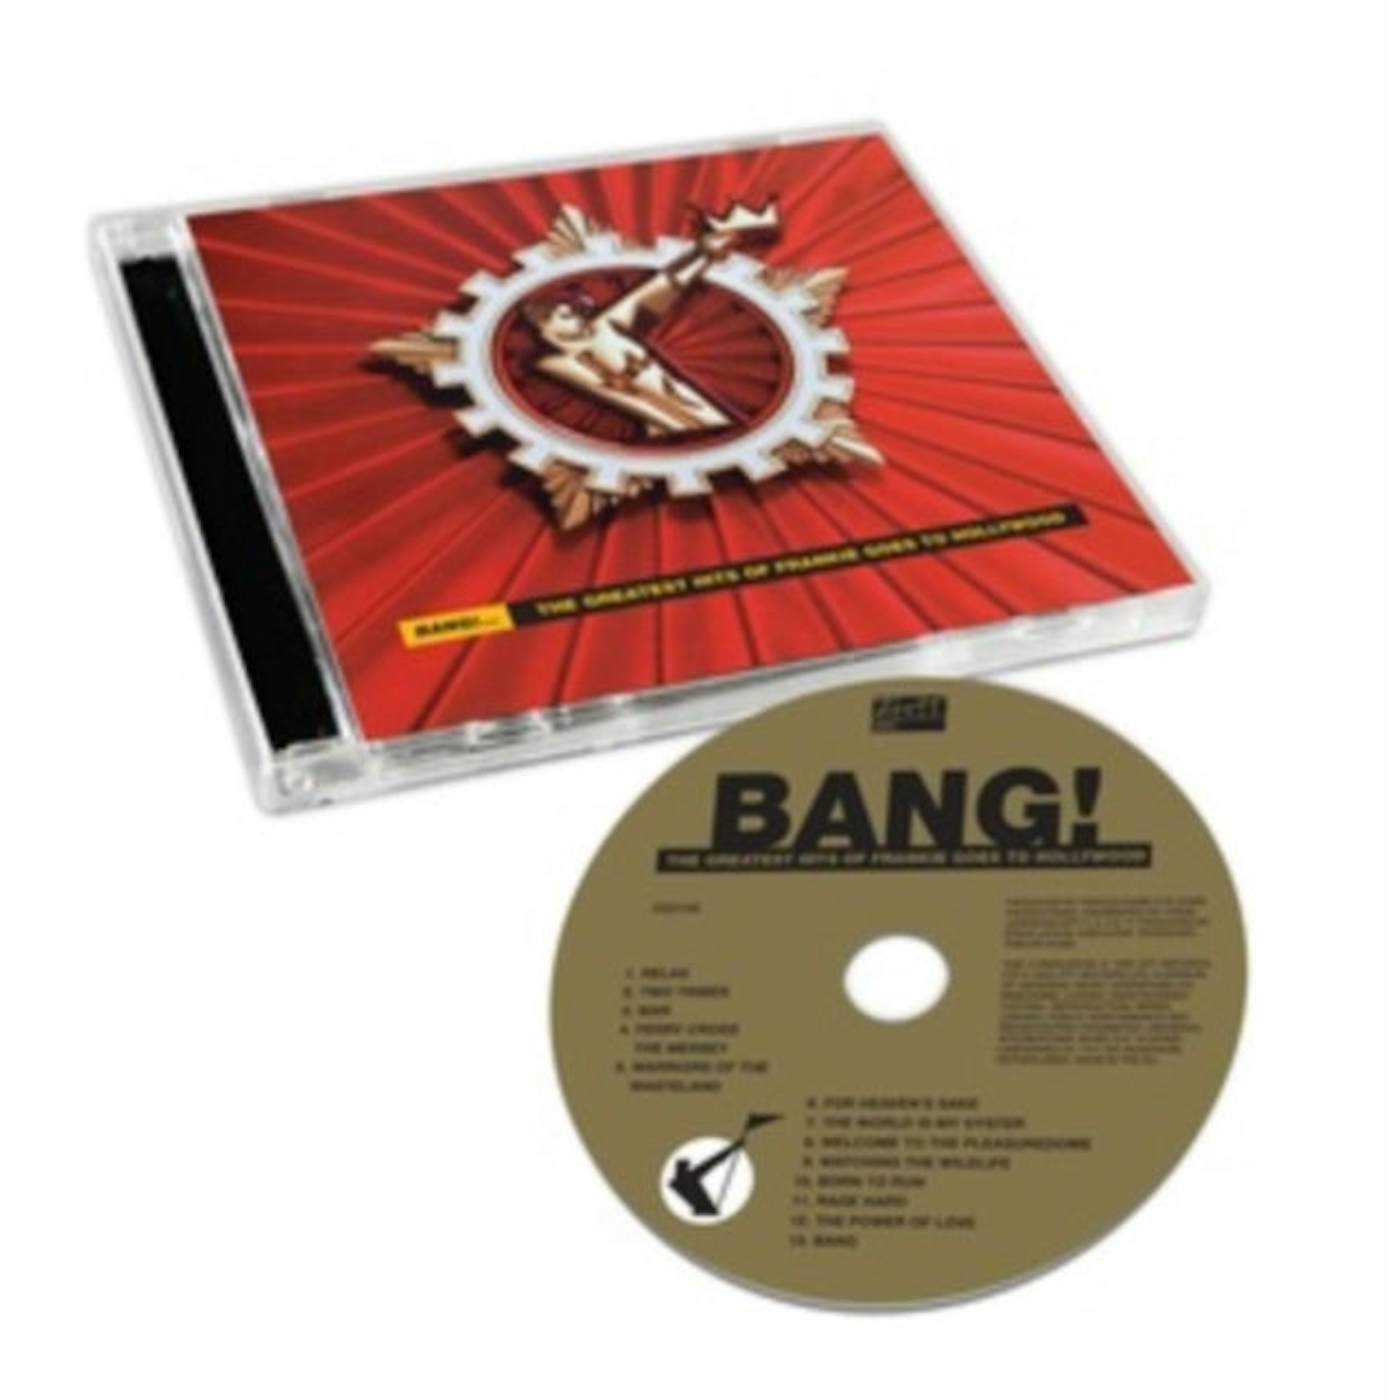 Frankie Goes To Hollywood CD - Bang! - The Best Of Frankie Goes To Hollywood